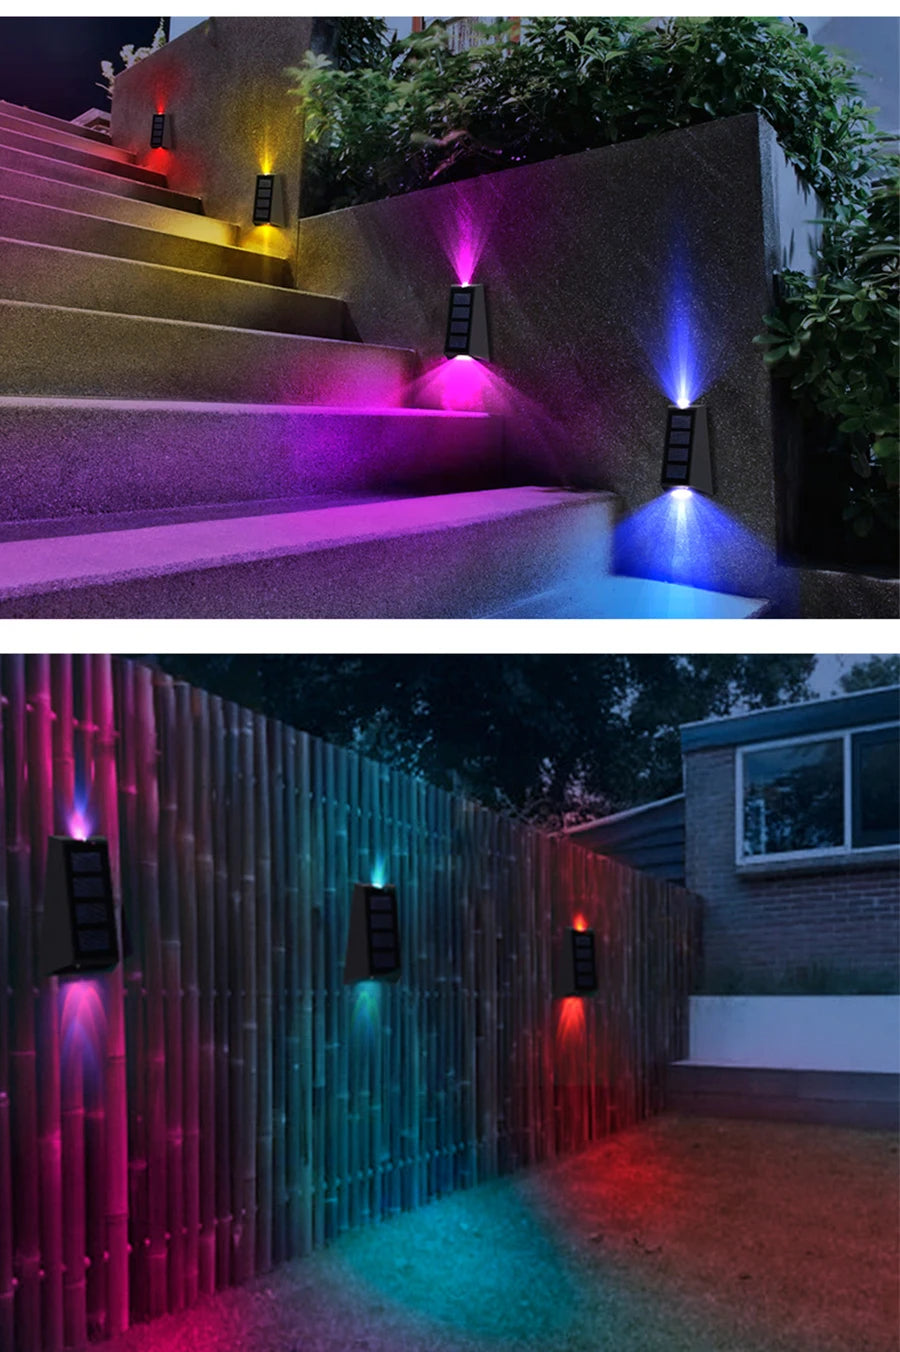 Decoration Solar Garden Light, Waterproof coating for outdoor use, protects surfaces from damage, suitable for walkways, fences, and gutters.